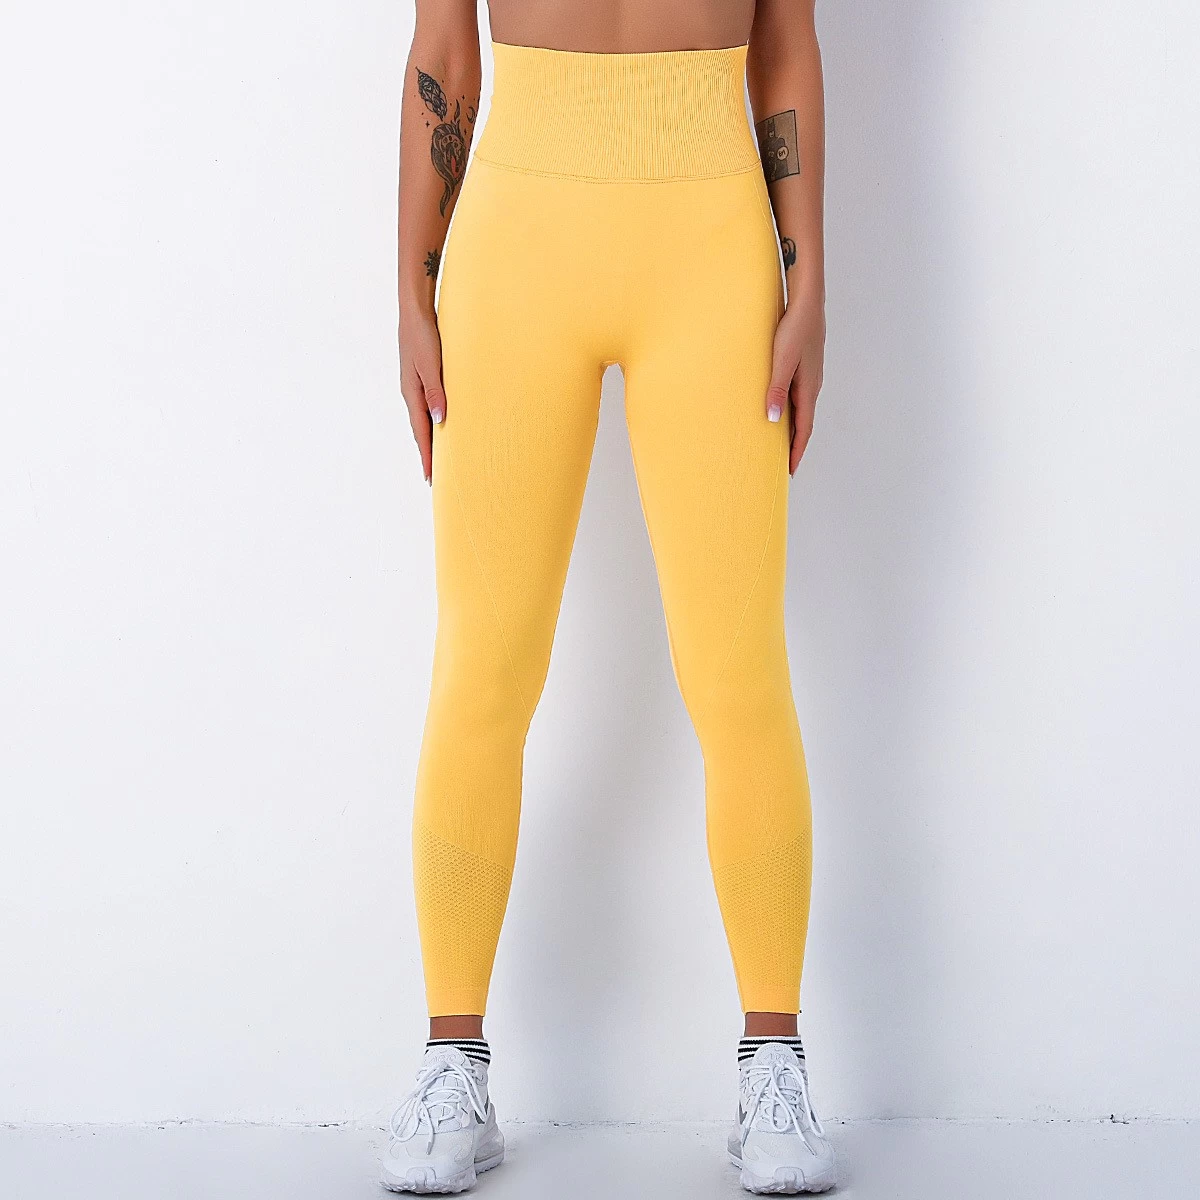 Fitness And Yoga Wear Supplier